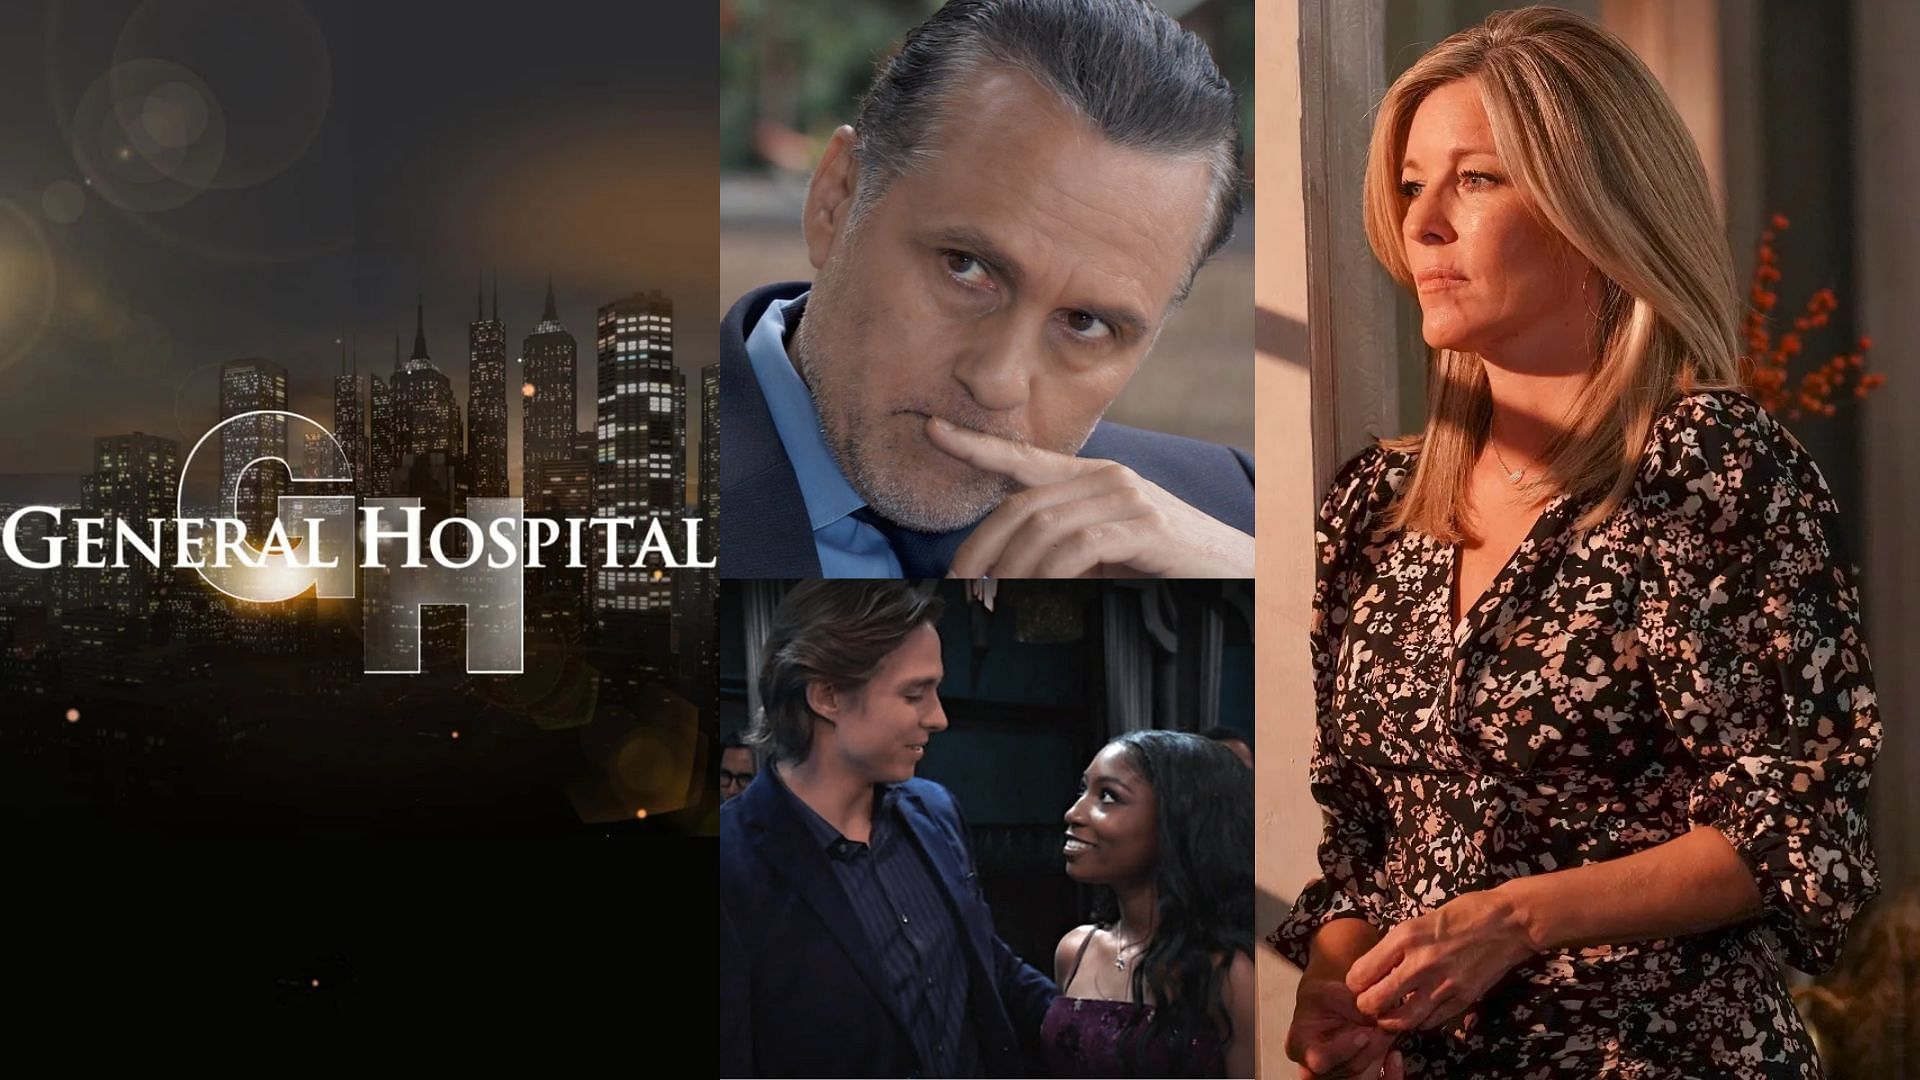 General Hospital airs on ABC from Monday to Friday. (Images via YouTube/General Hospital)